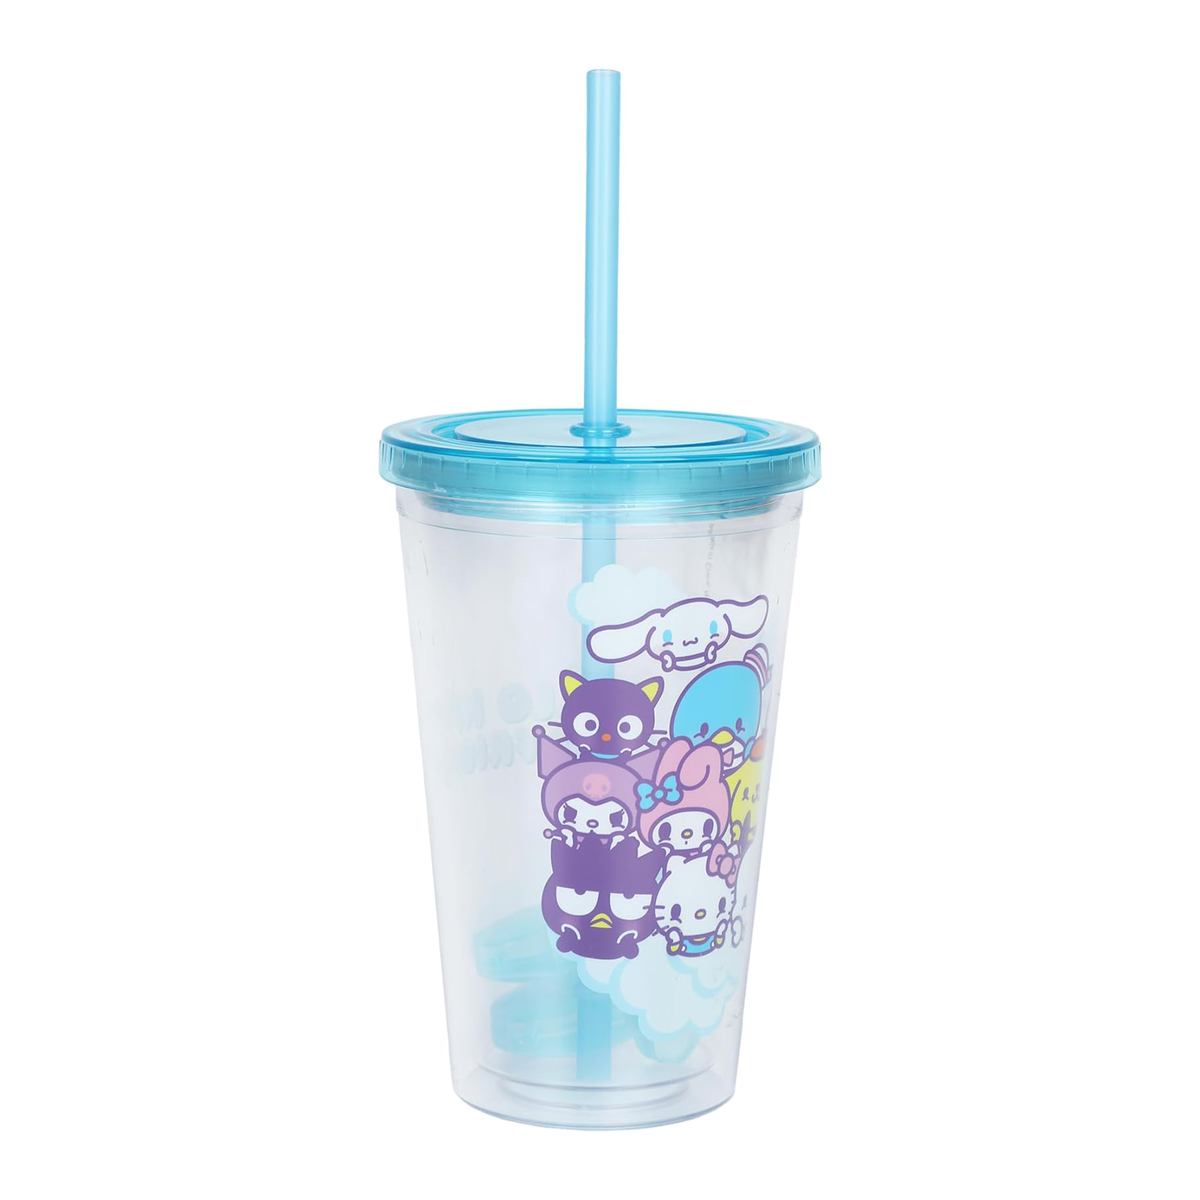 Bioworld Hello Kitty & Friends 16 oz. Acrylic Cup with Reusable Straw